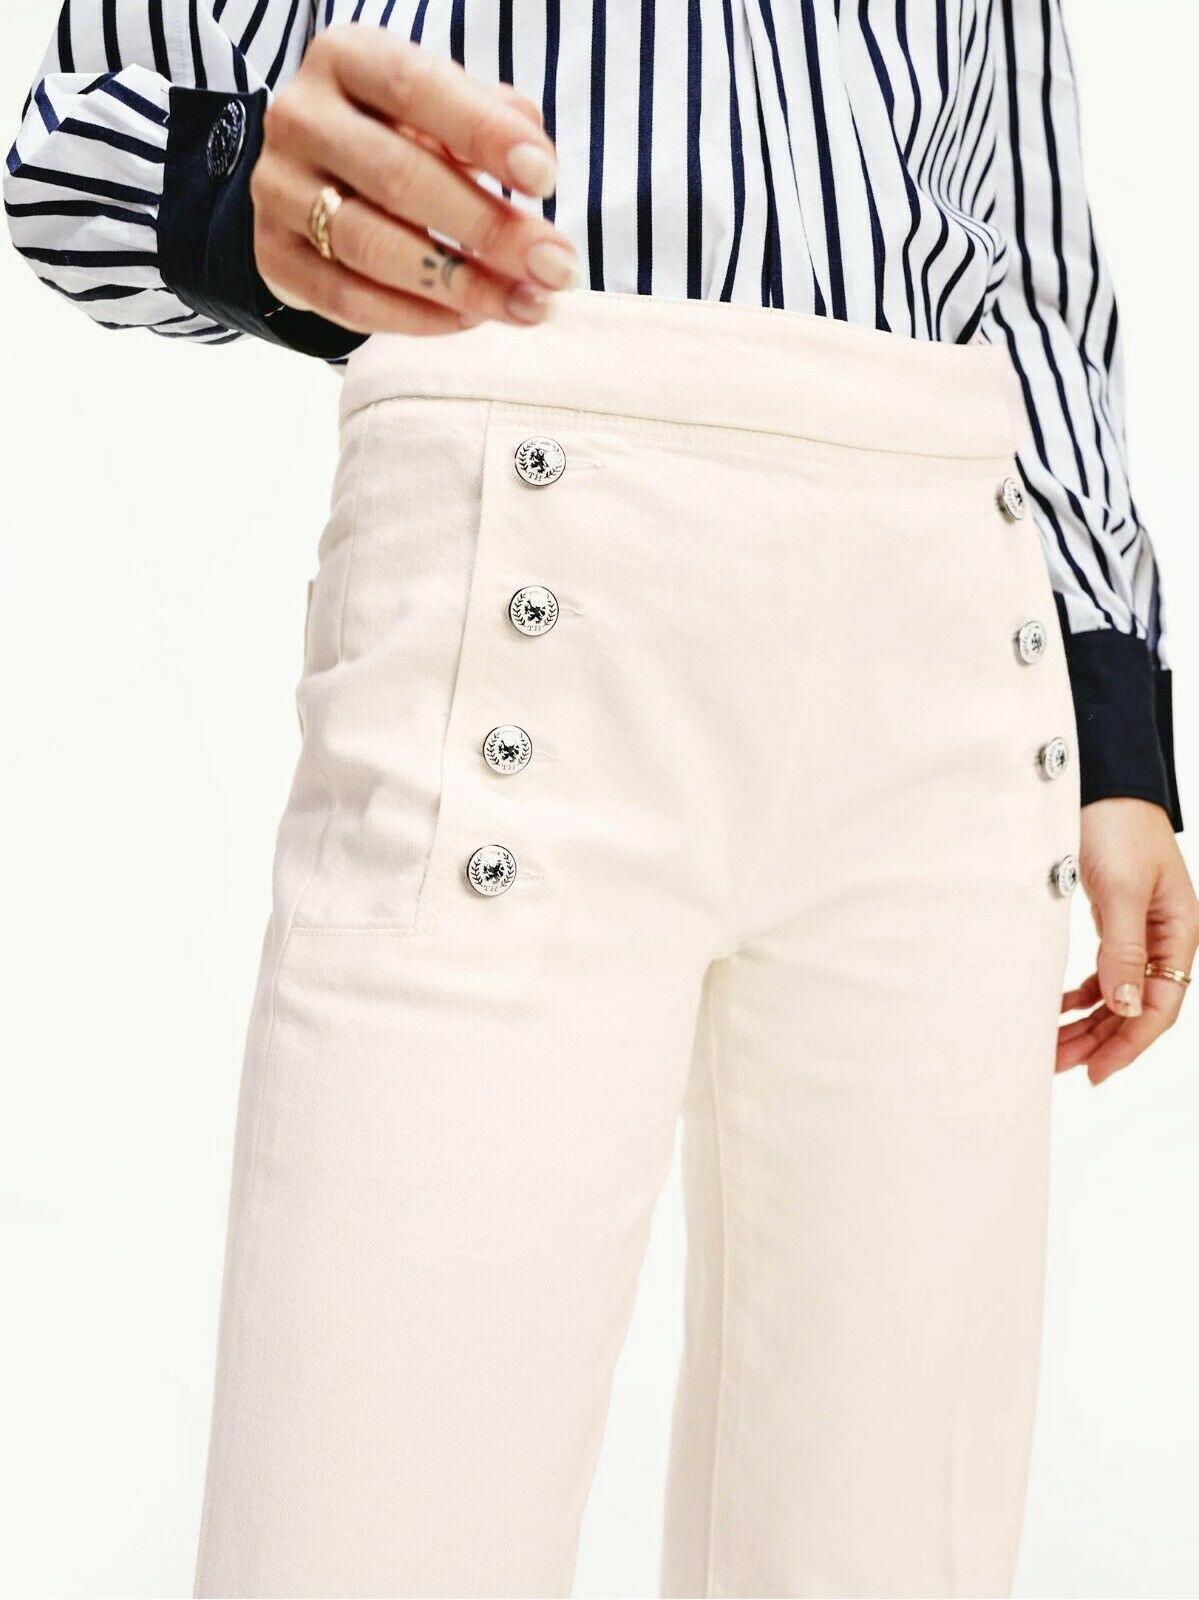 Tommy Hilfiger Icon Sailor High Waist Flare Jeans Off White 35" Inseam Size US 4 - SVNYFancy